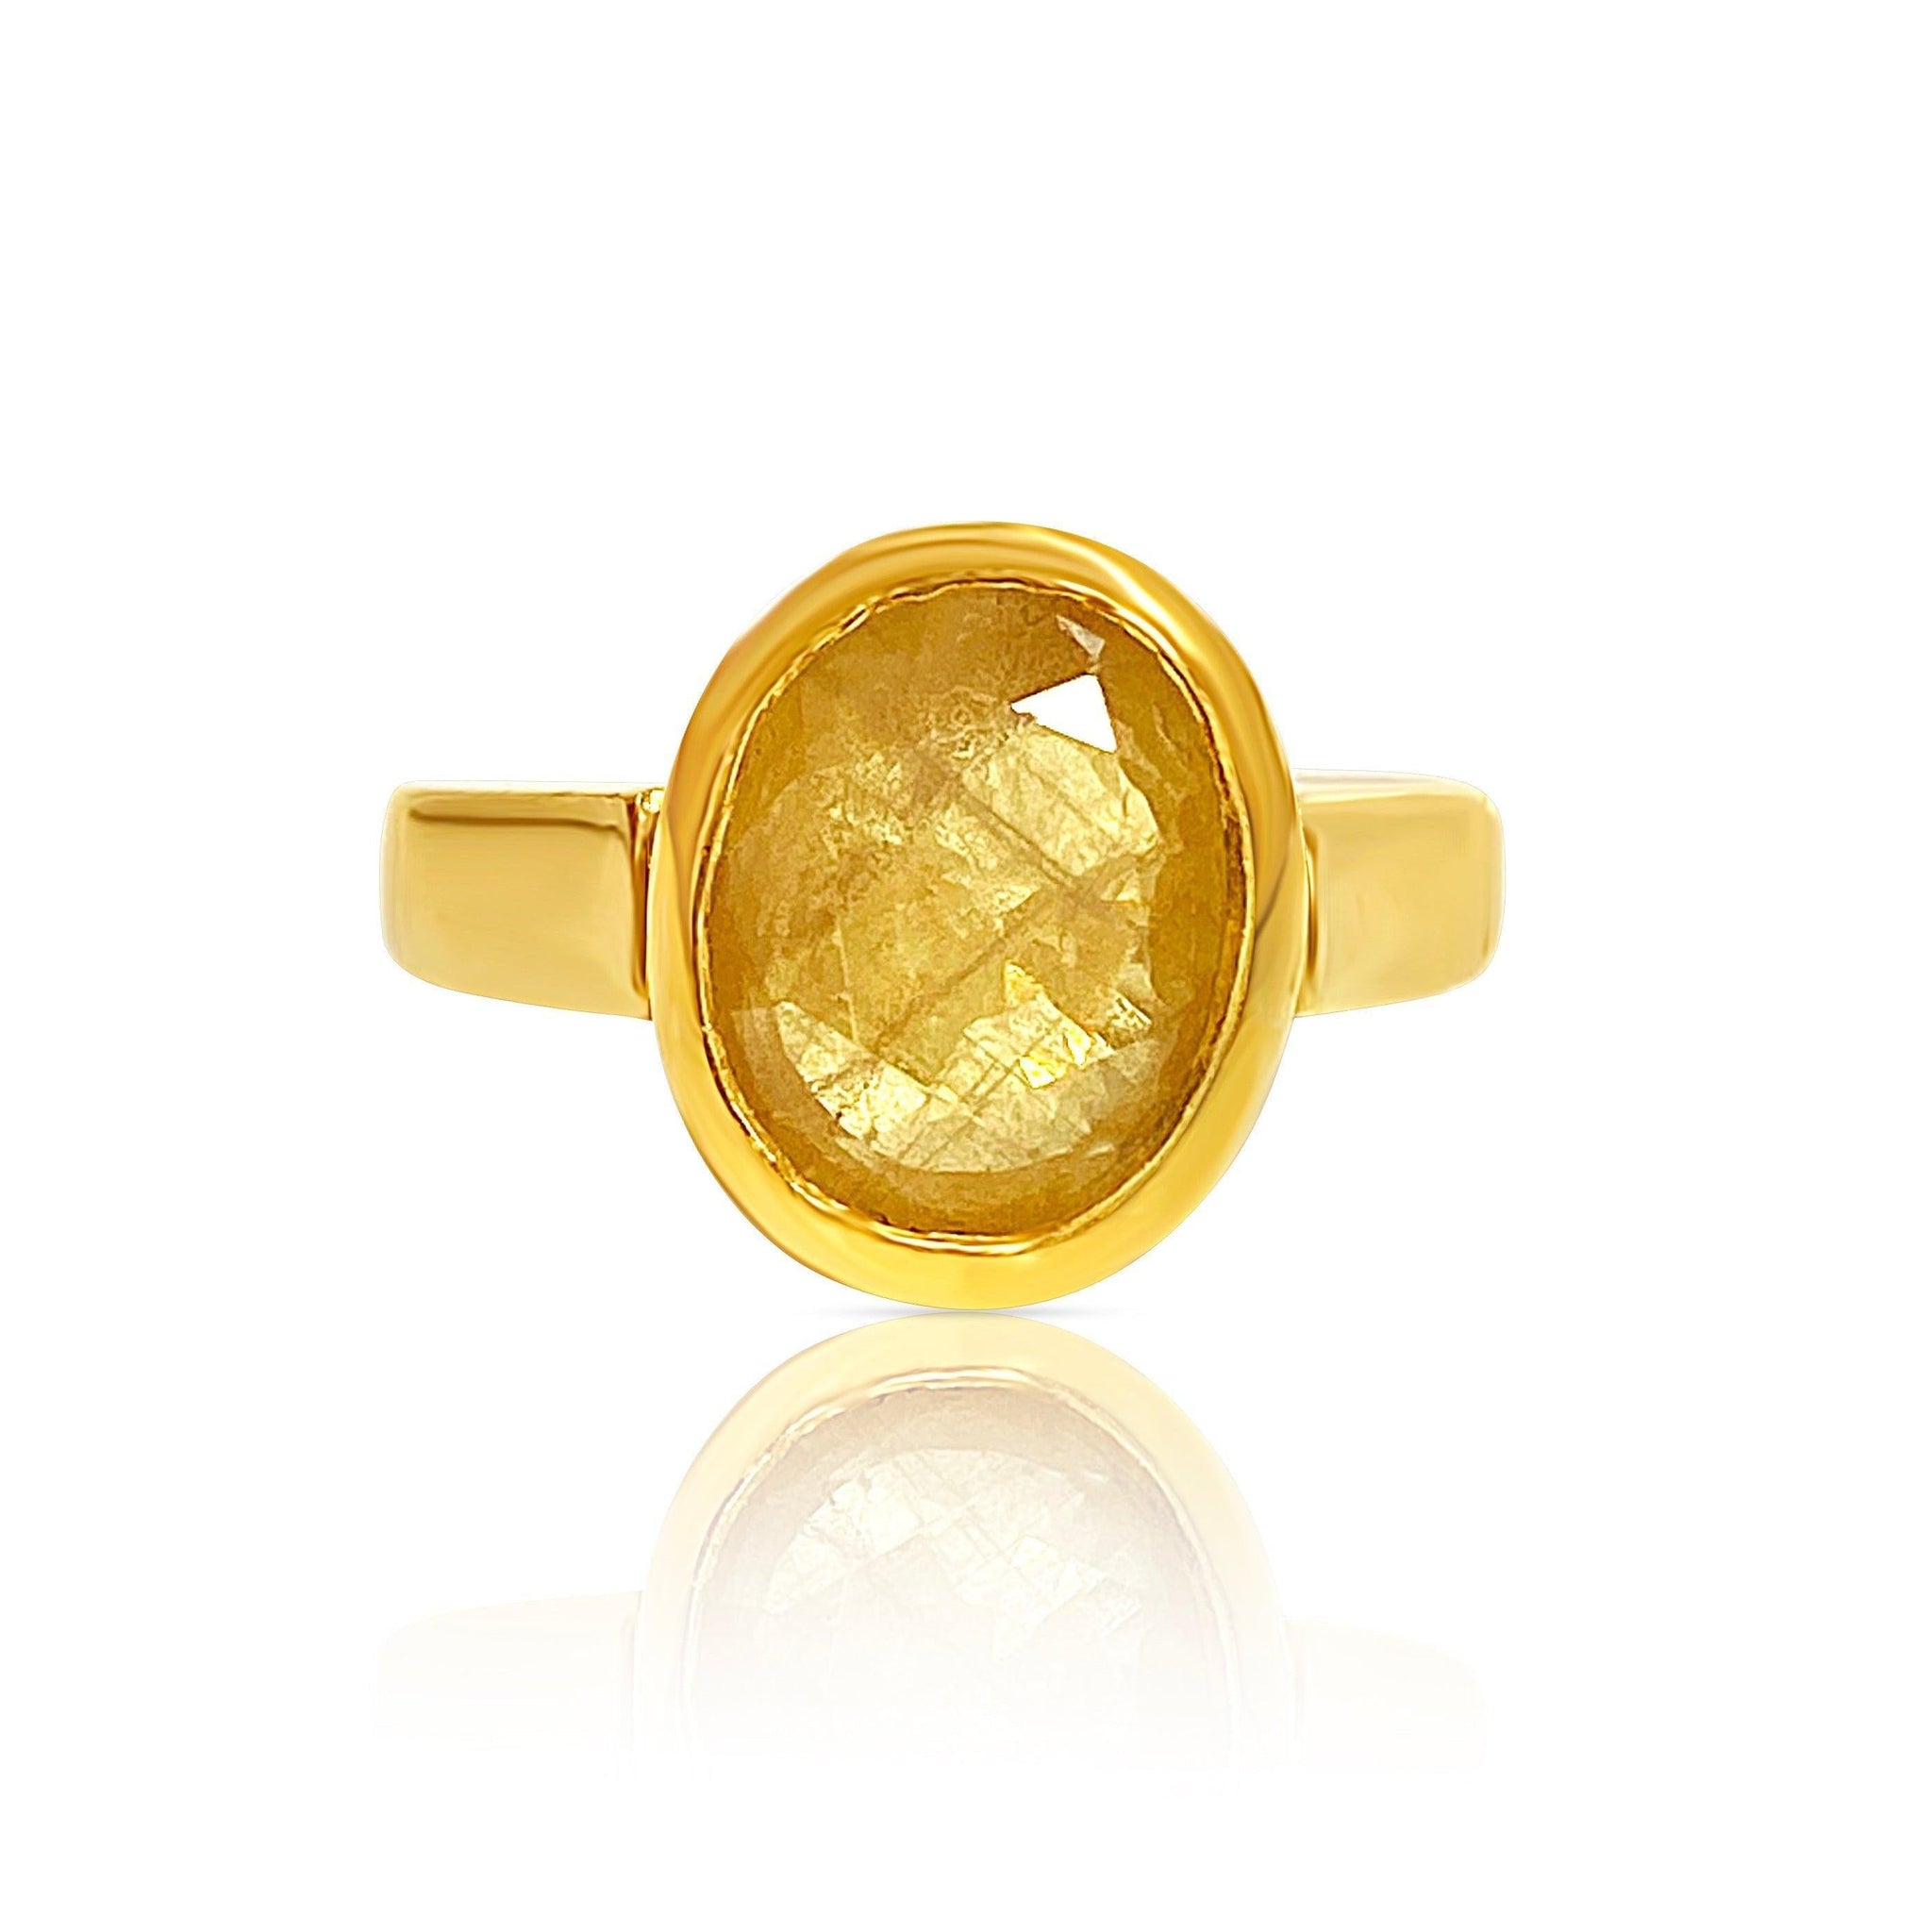 Vintage Natural Yellow Sapphire Engagement Ring in 22k Solid Gold - ASSAY